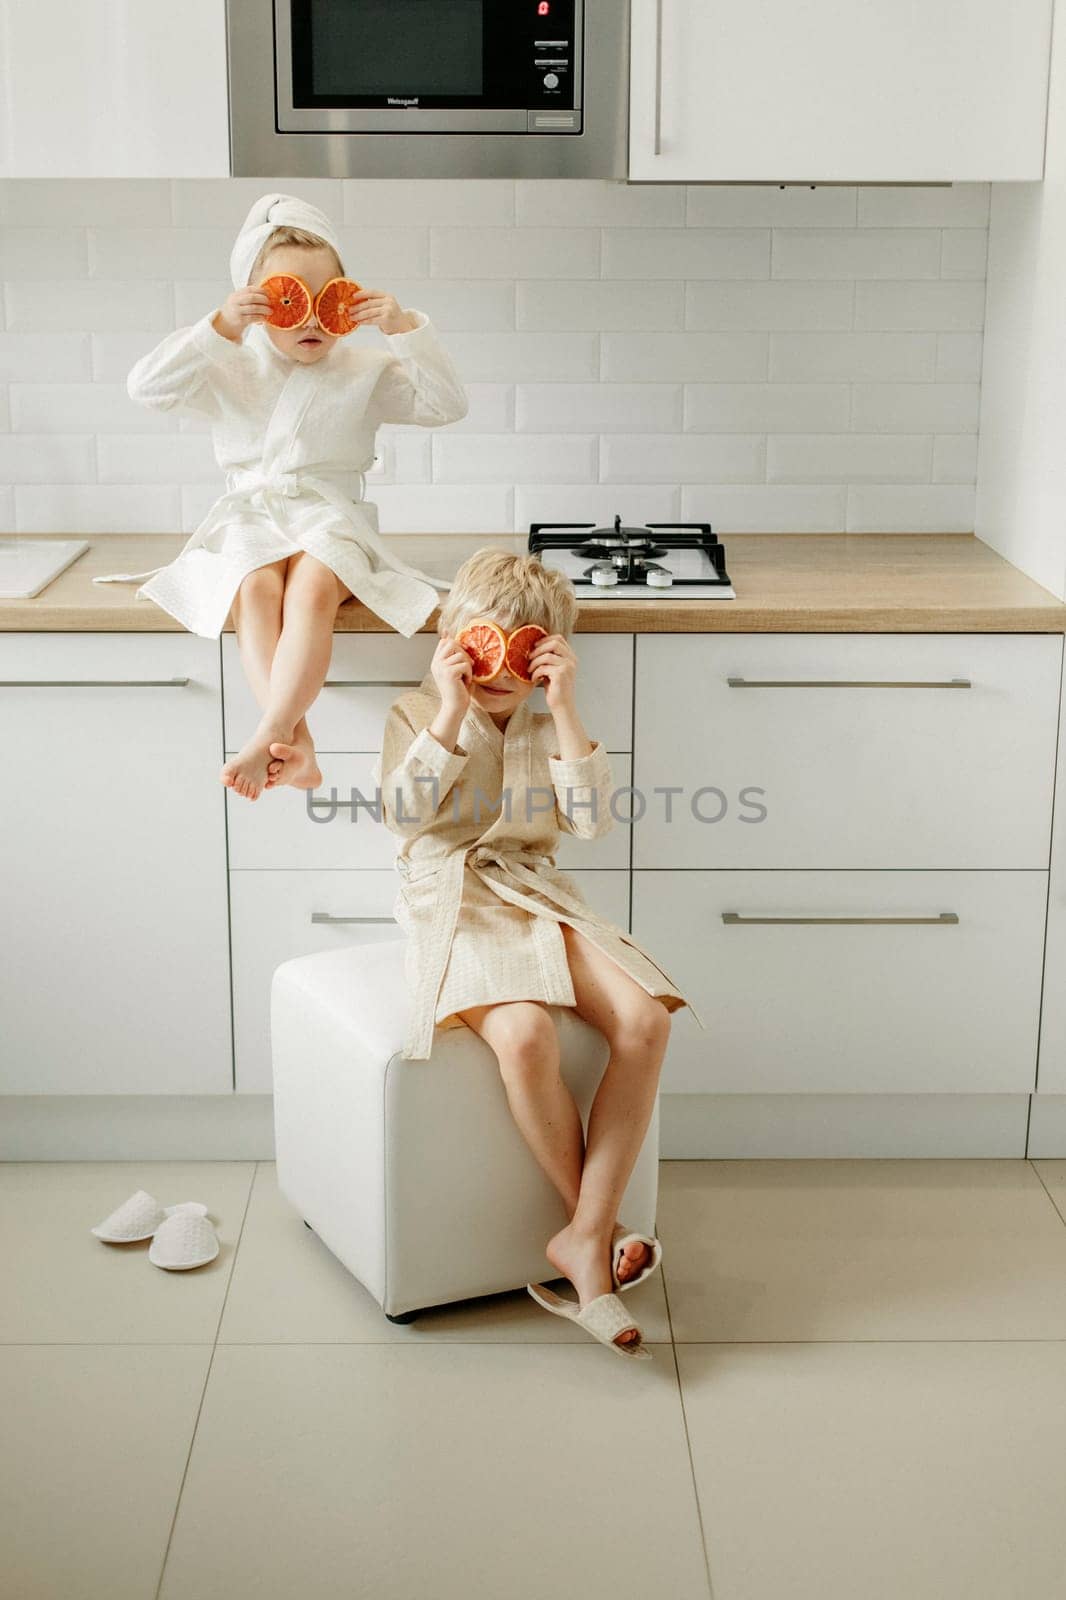 A girl and a boy in bathrobes sit in the kitchen and close their eyes with candied oranges.